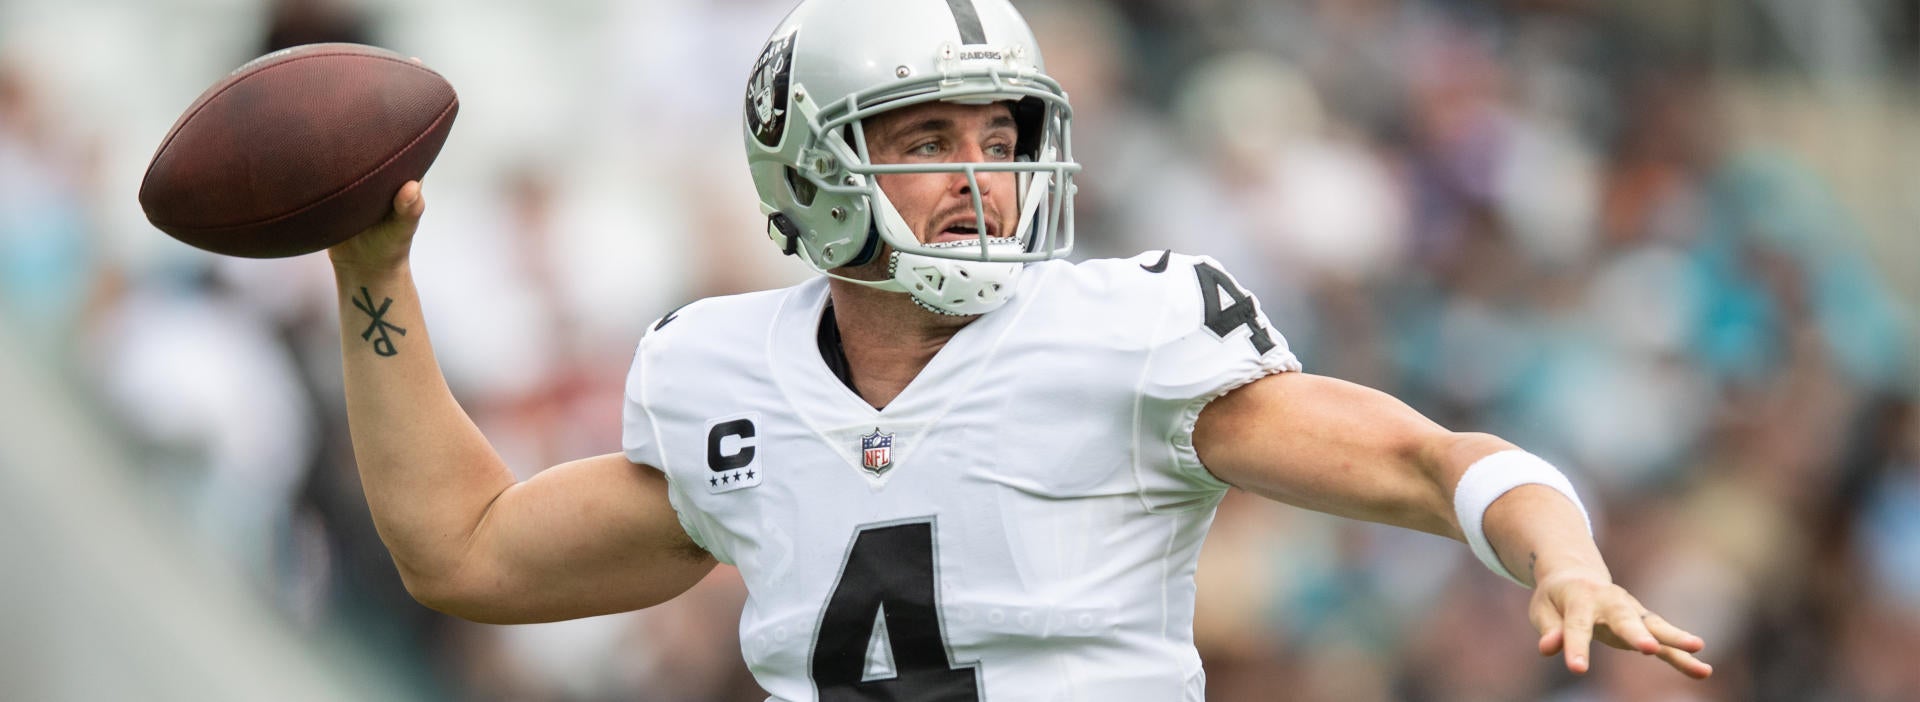 Derek Carr next team free agency odds: Saints, Panthers, Titans favorites to sign Pro Bowl quarterback after release from Raiders